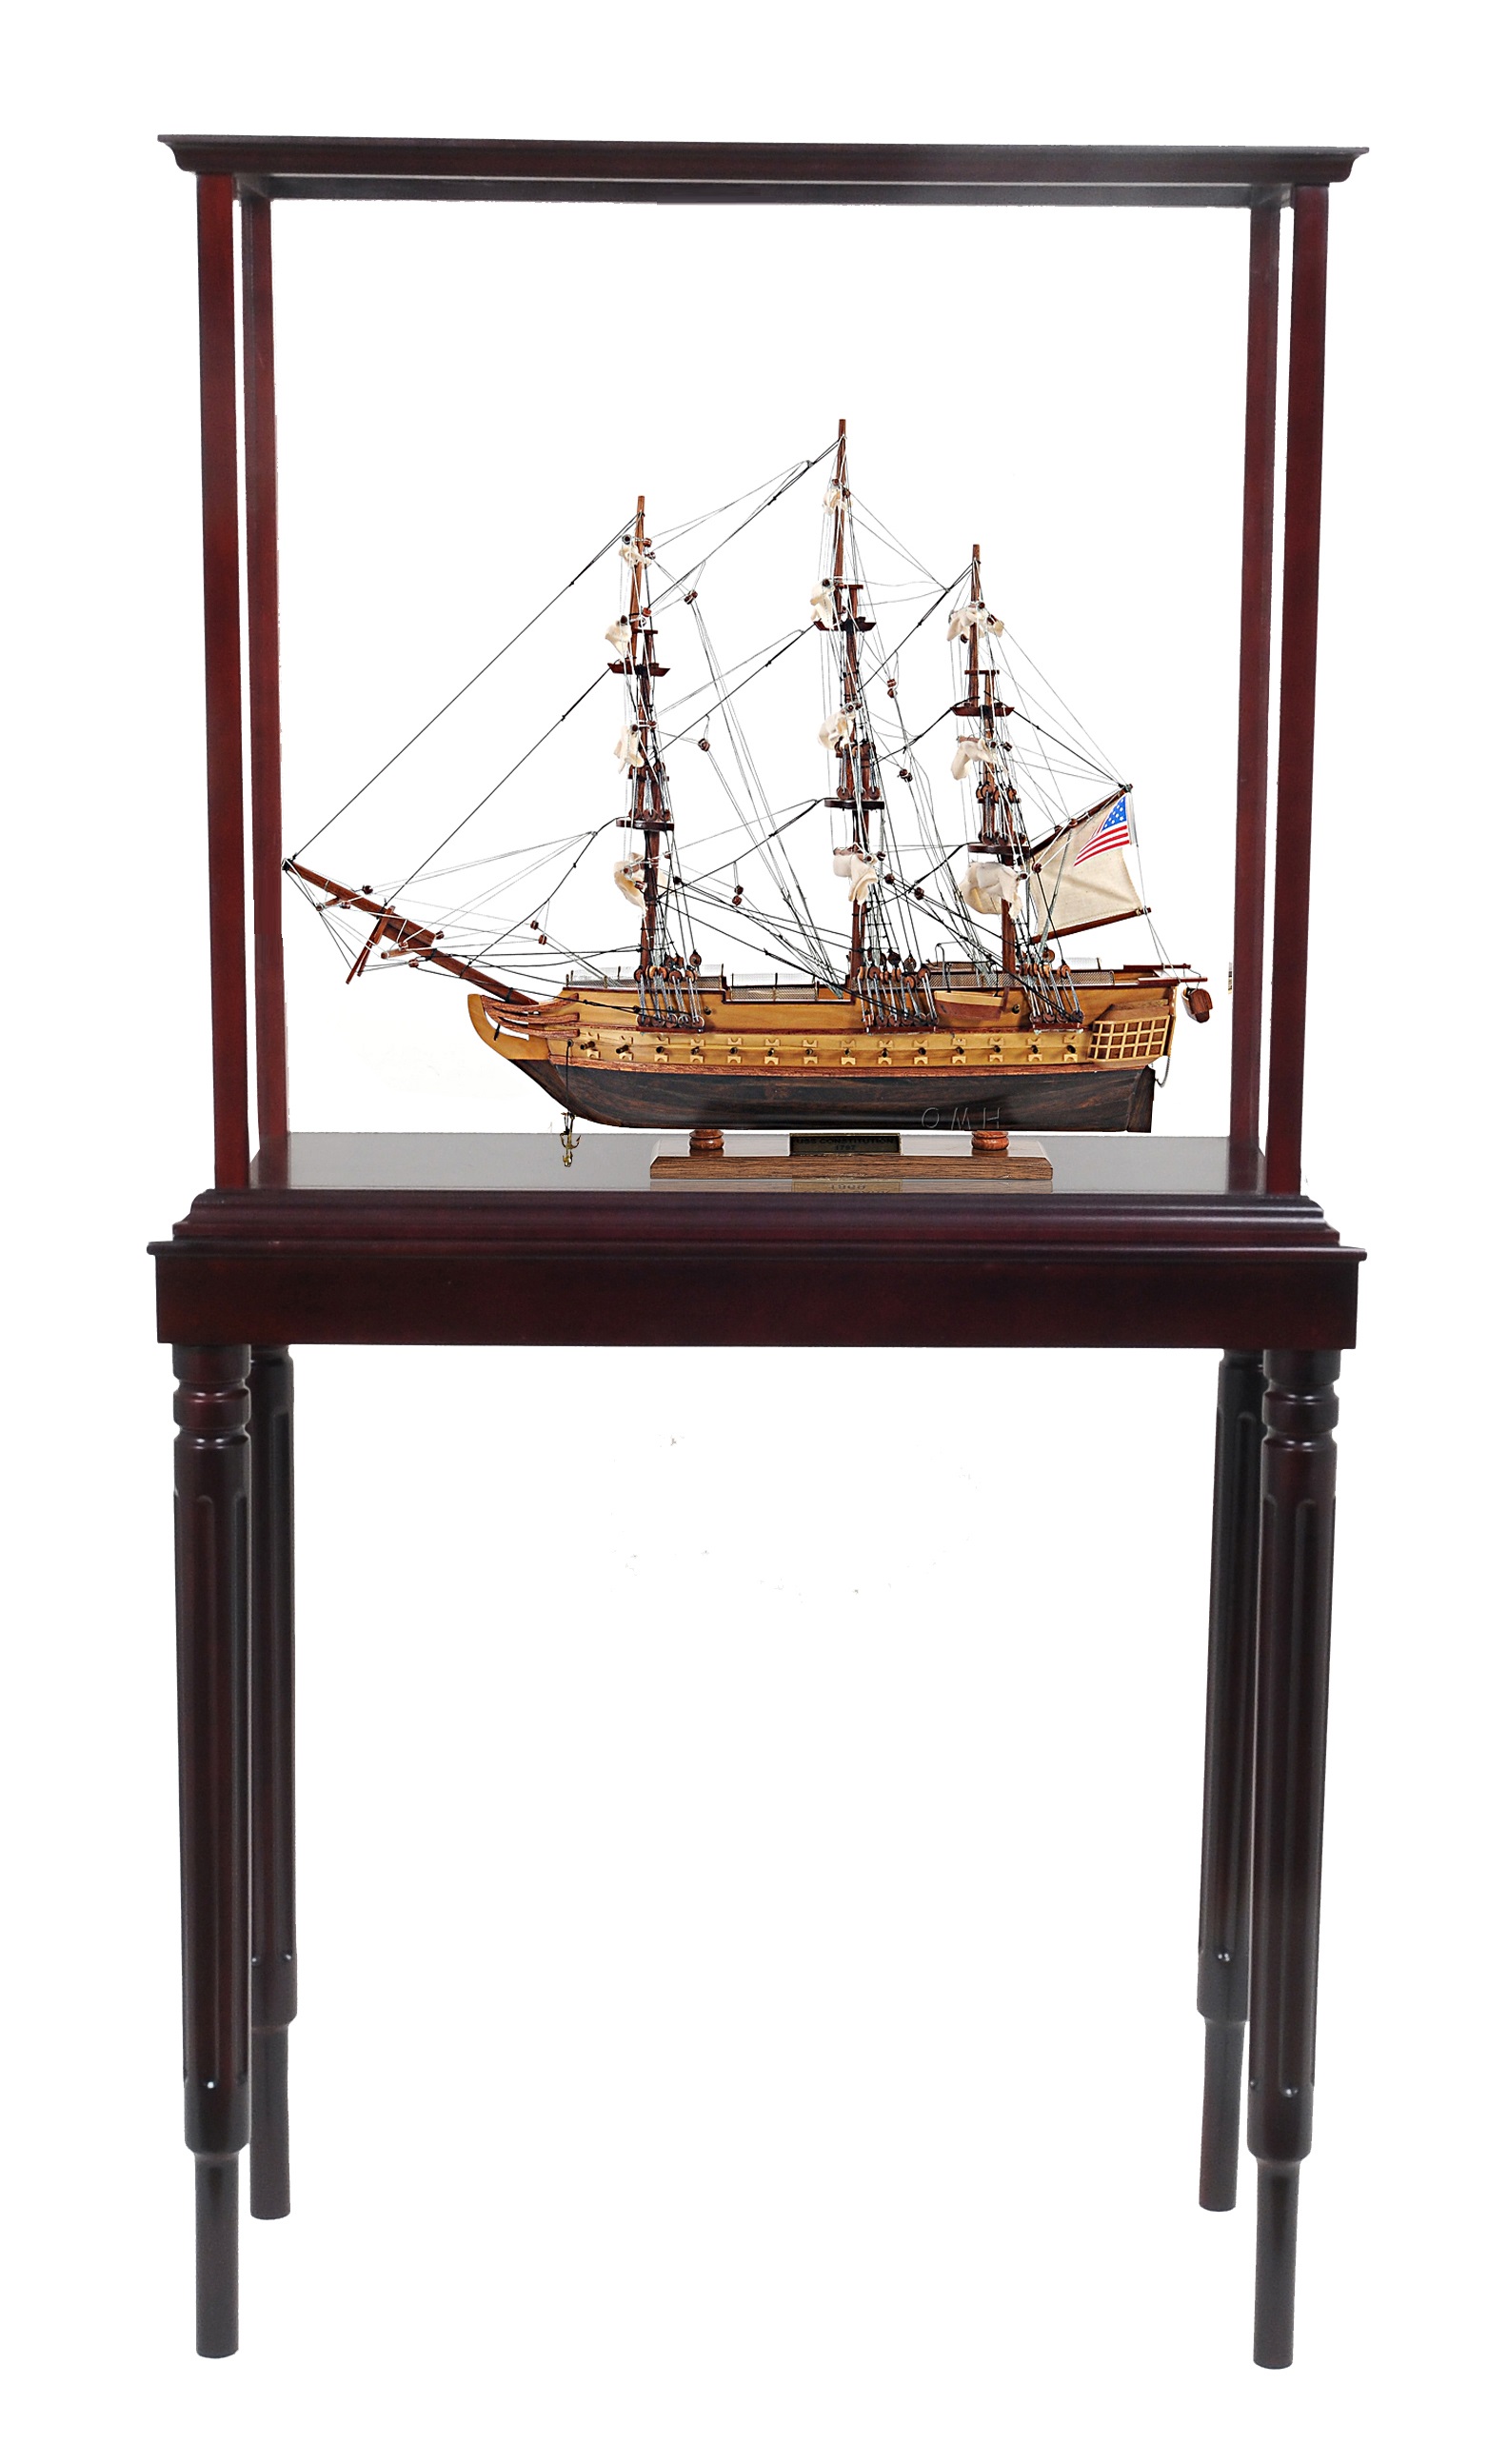 T089A USS Constitution Small with Display Case t089a-uss-constitution-small-with-display-case-l01.jpg